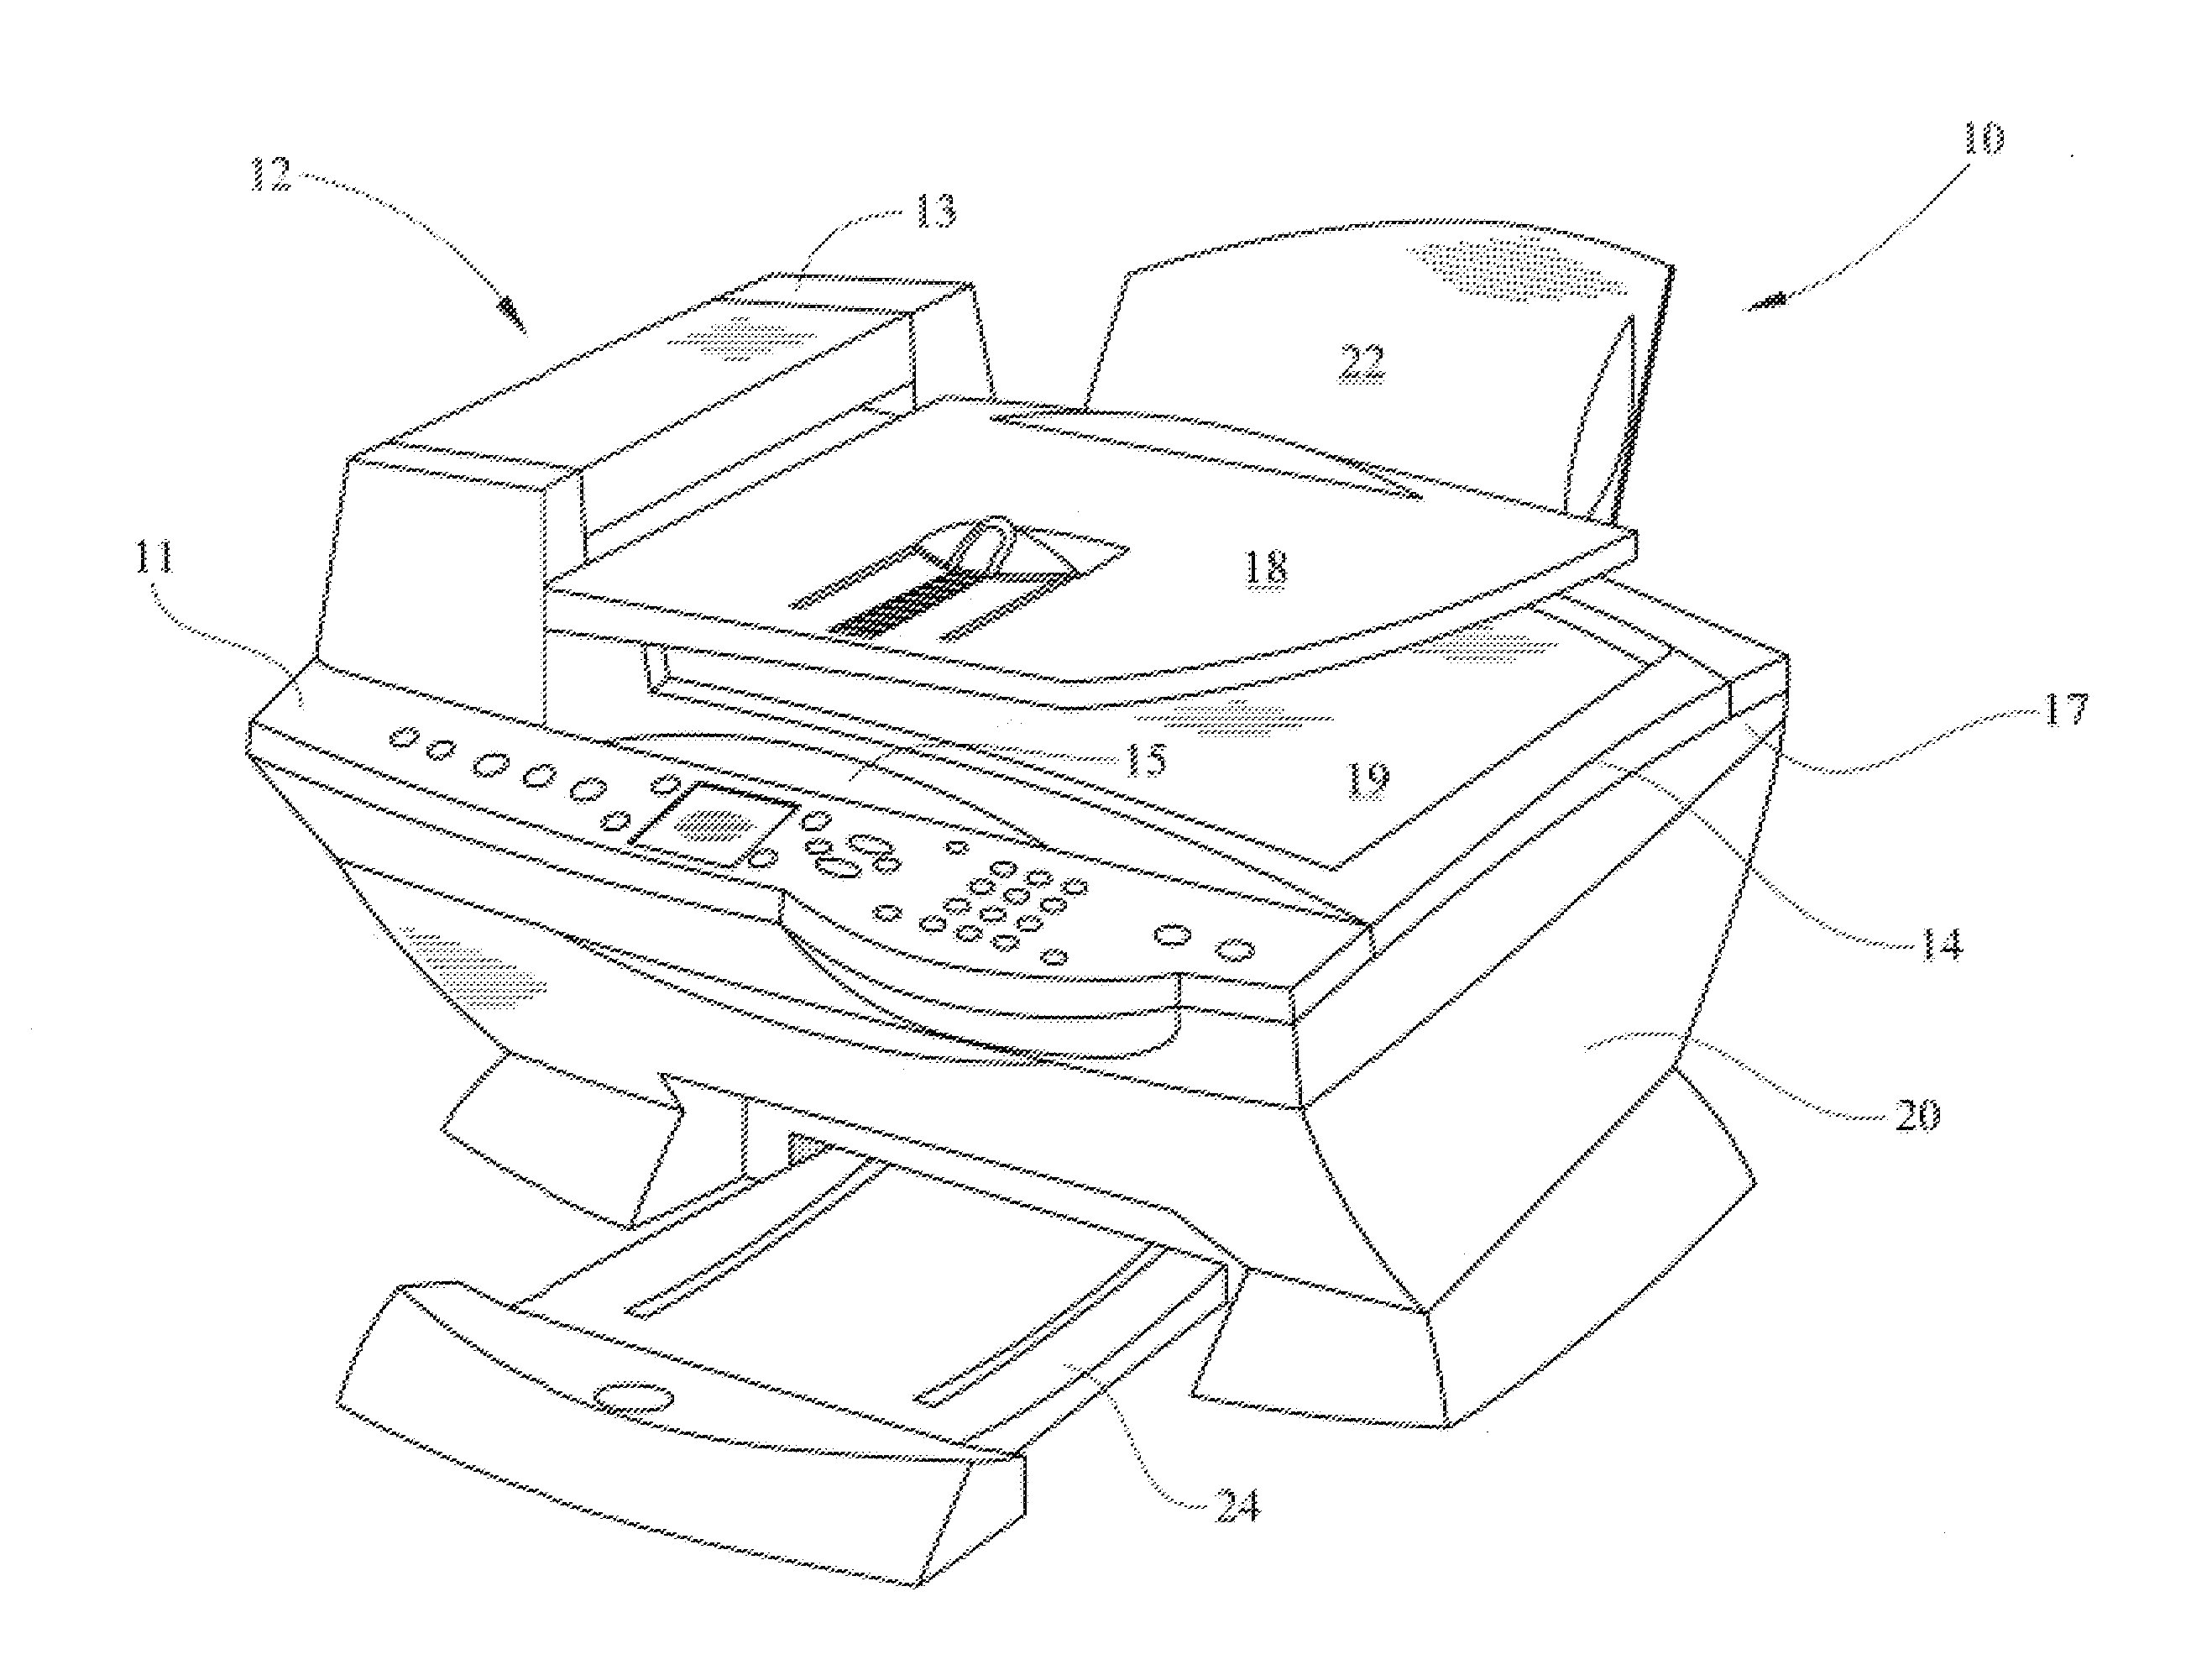 Trough Support Ribs and Method of Use